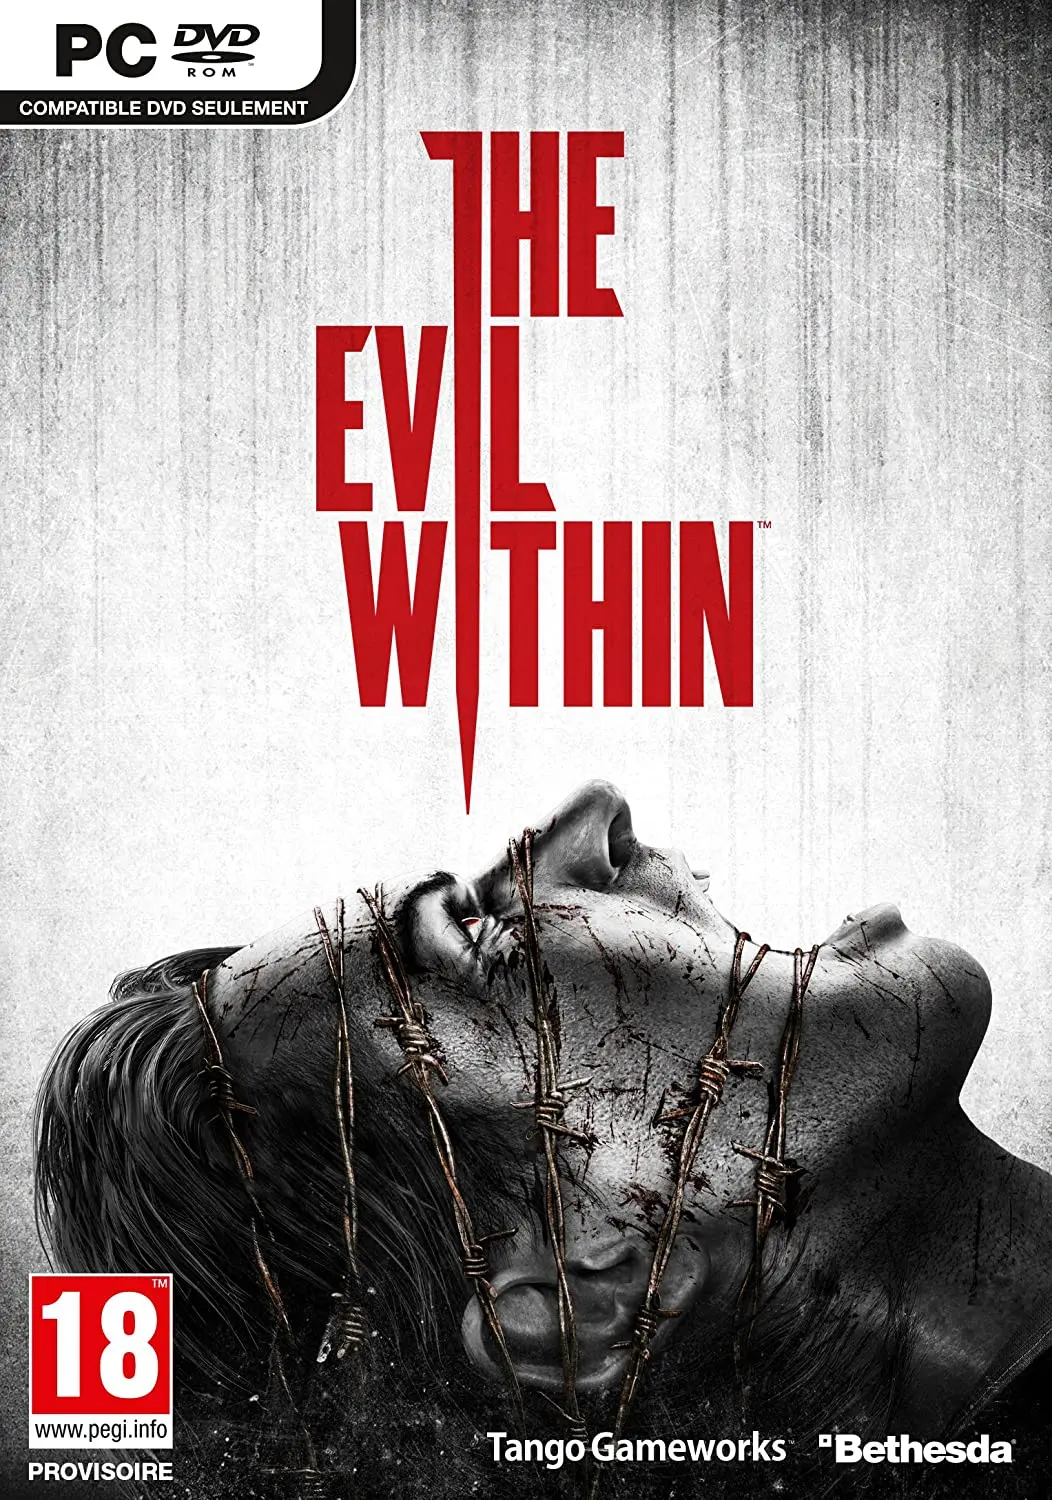 The Evil Within Day One Edition (EU) (PC) - Steam - Digital Code